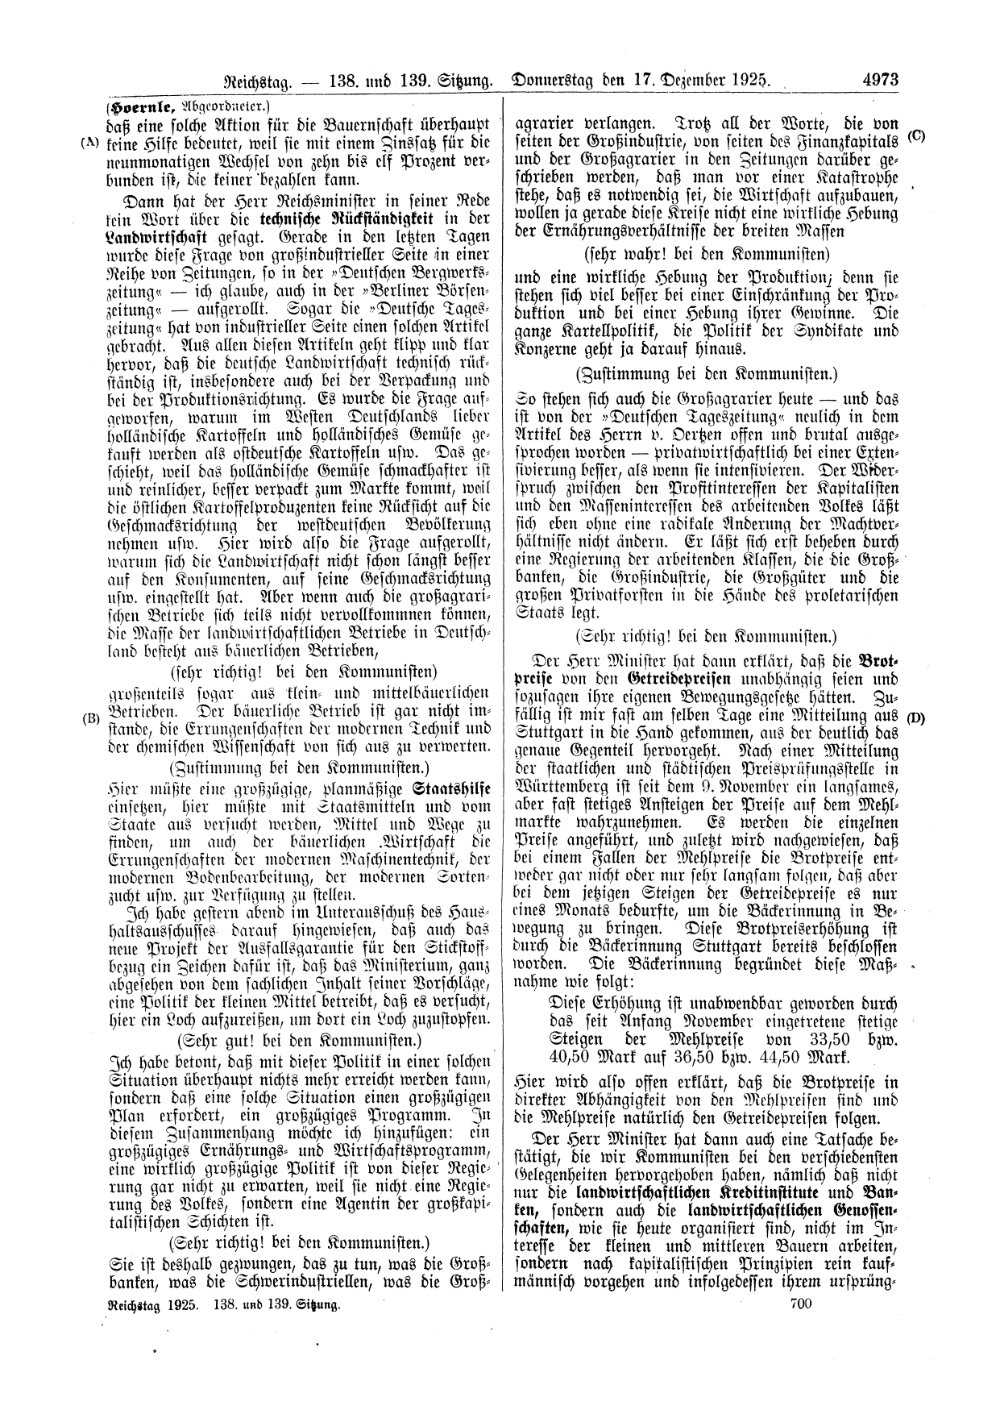 Scan of page 4973